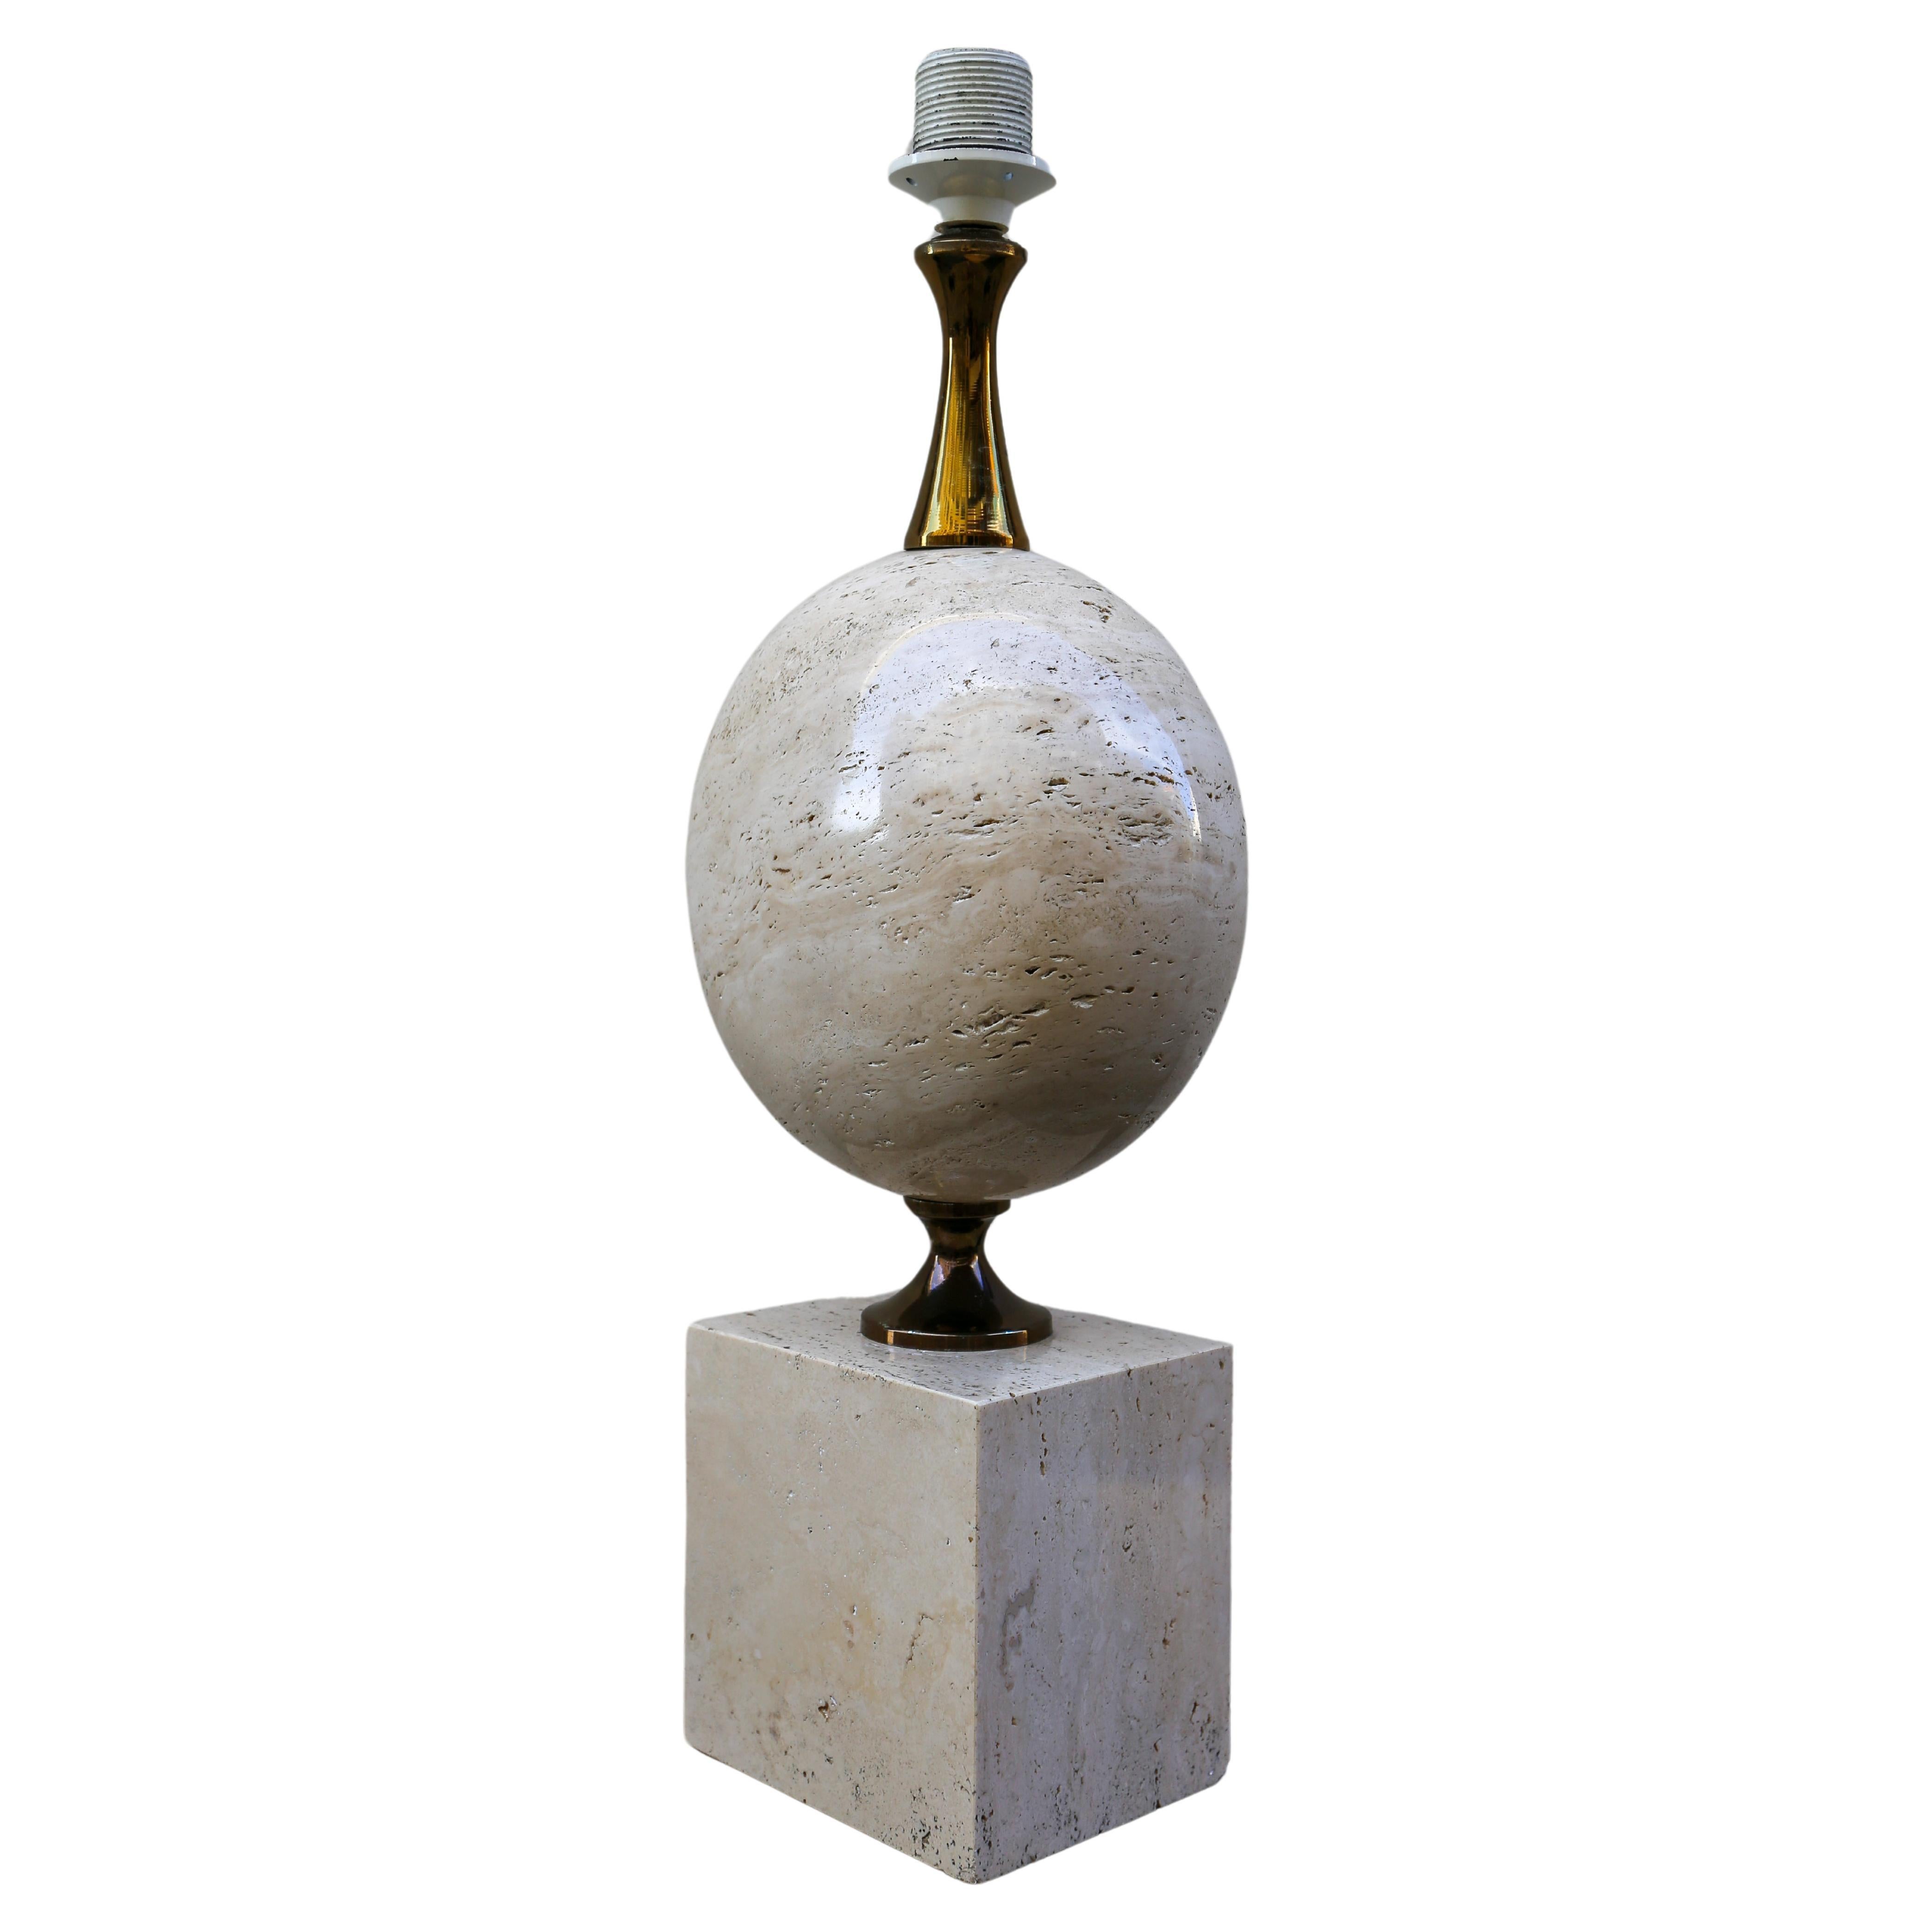 1970s Large Travertine Floor Lamp design by Philippe Barbier for Maison Barbier Paris France.

In the pure decorative spirit of 1970, very beautiful lamp by Philippe Barbier designer in travertine and brass.
Elegant table / living room lamp composed